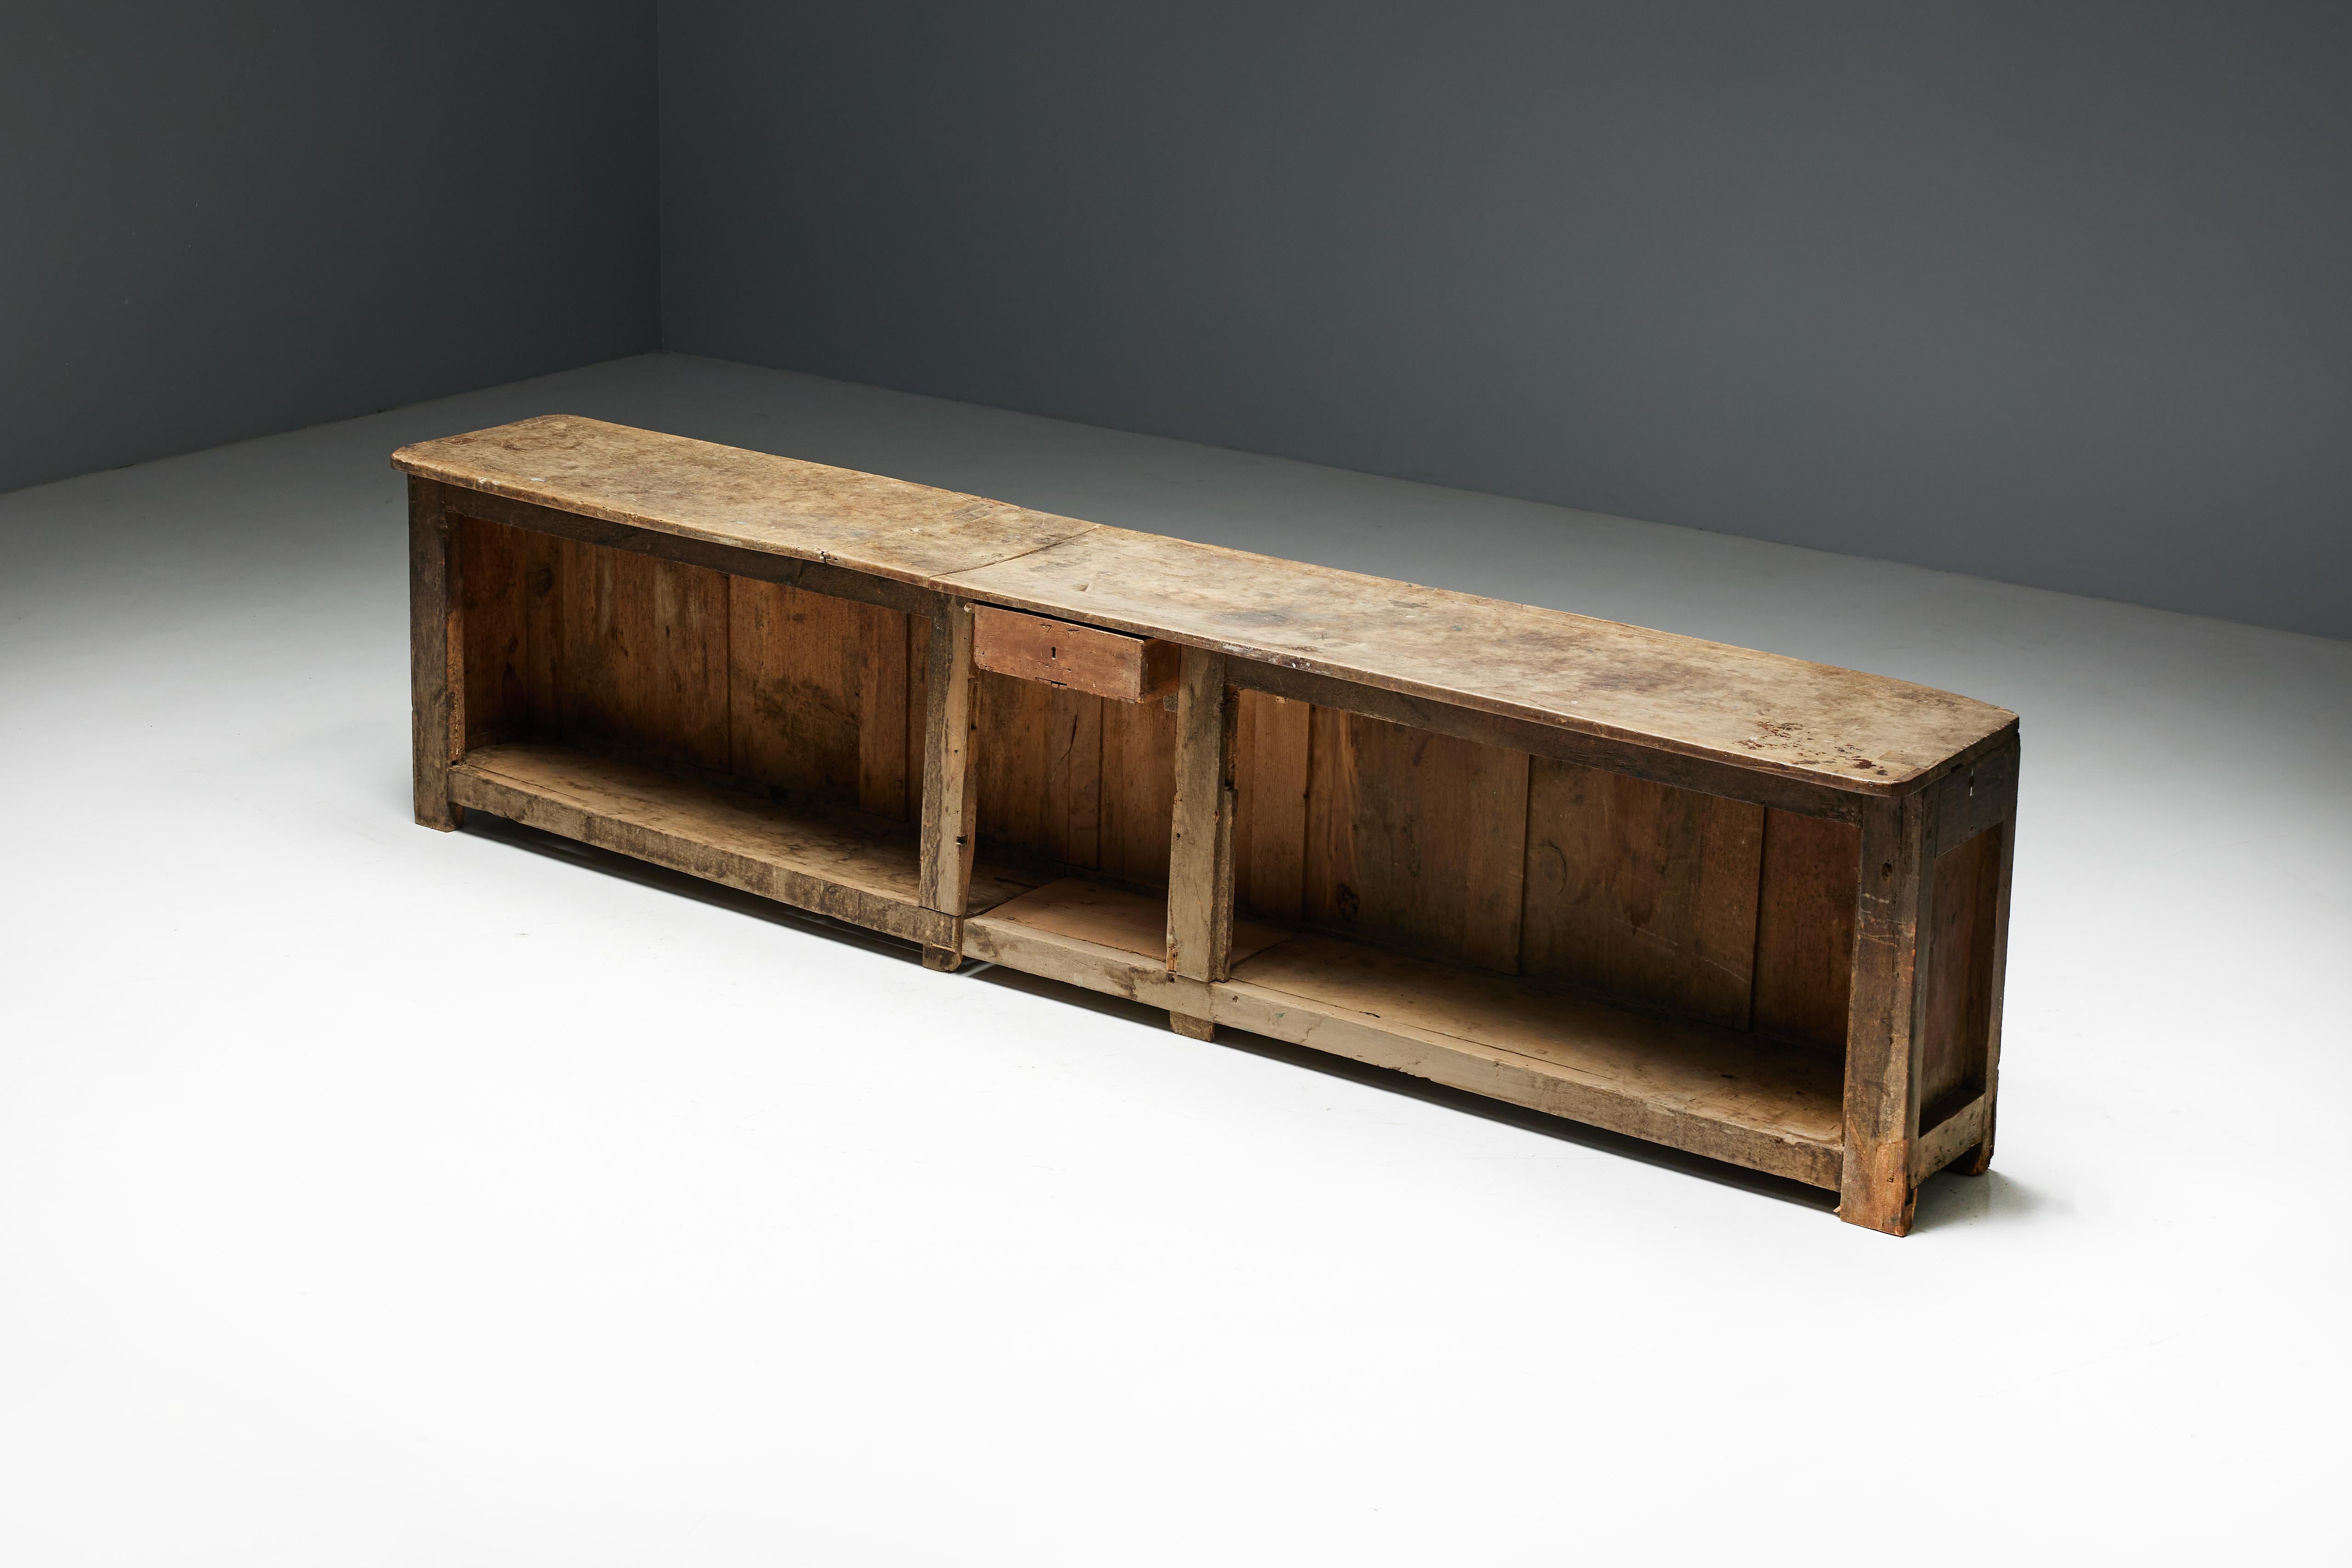 French Rustic Art Populaire Freestanding Bar Counter, France, 19th Century